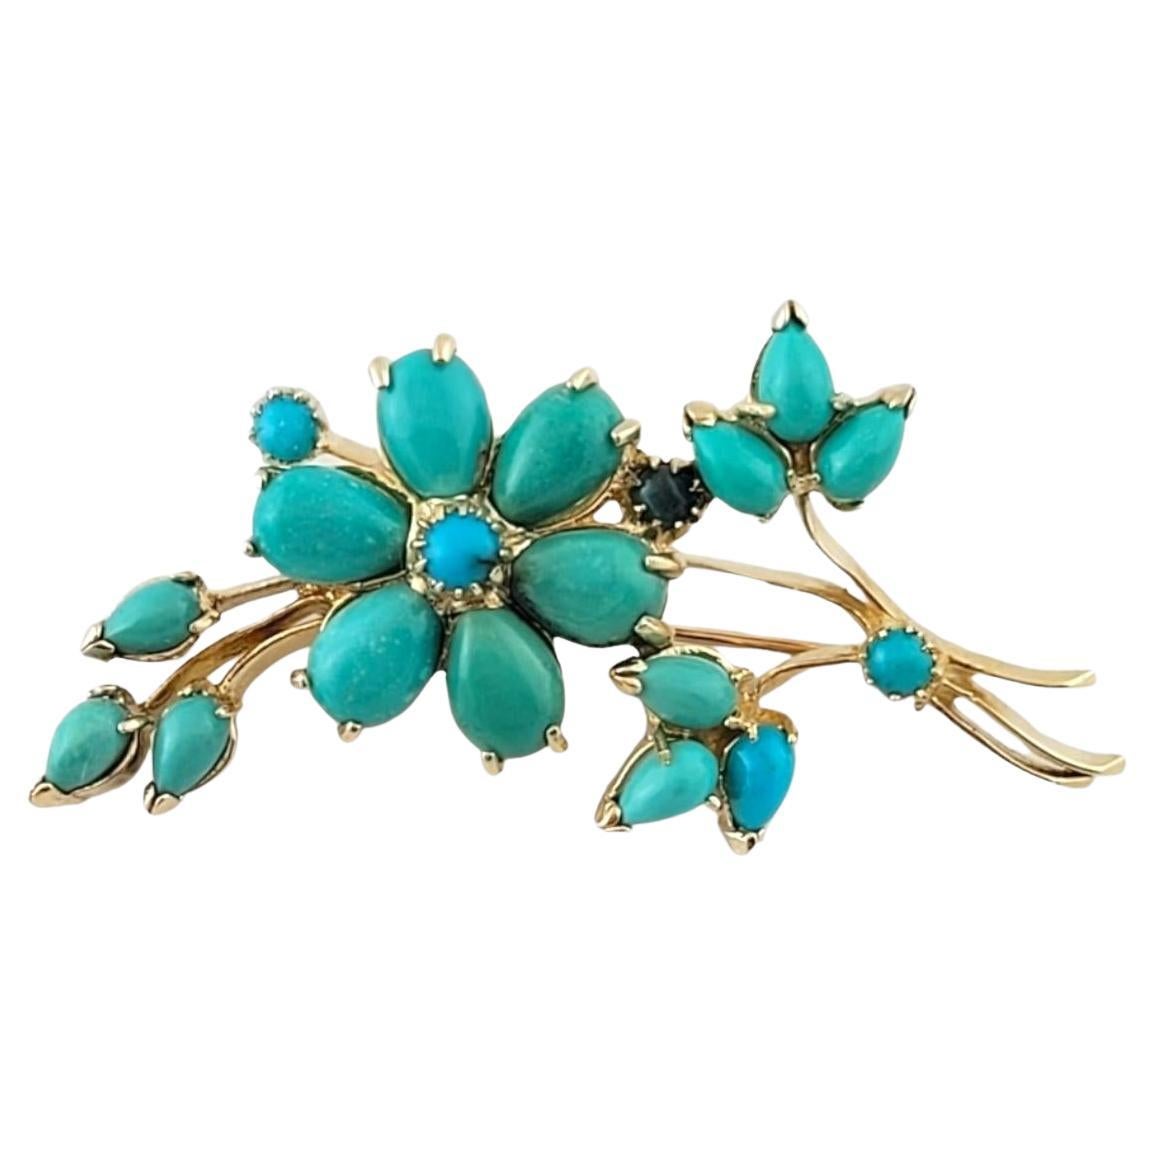 14K Yellow Gold Flower Pin with Turquoise Stones #15186 For Sale